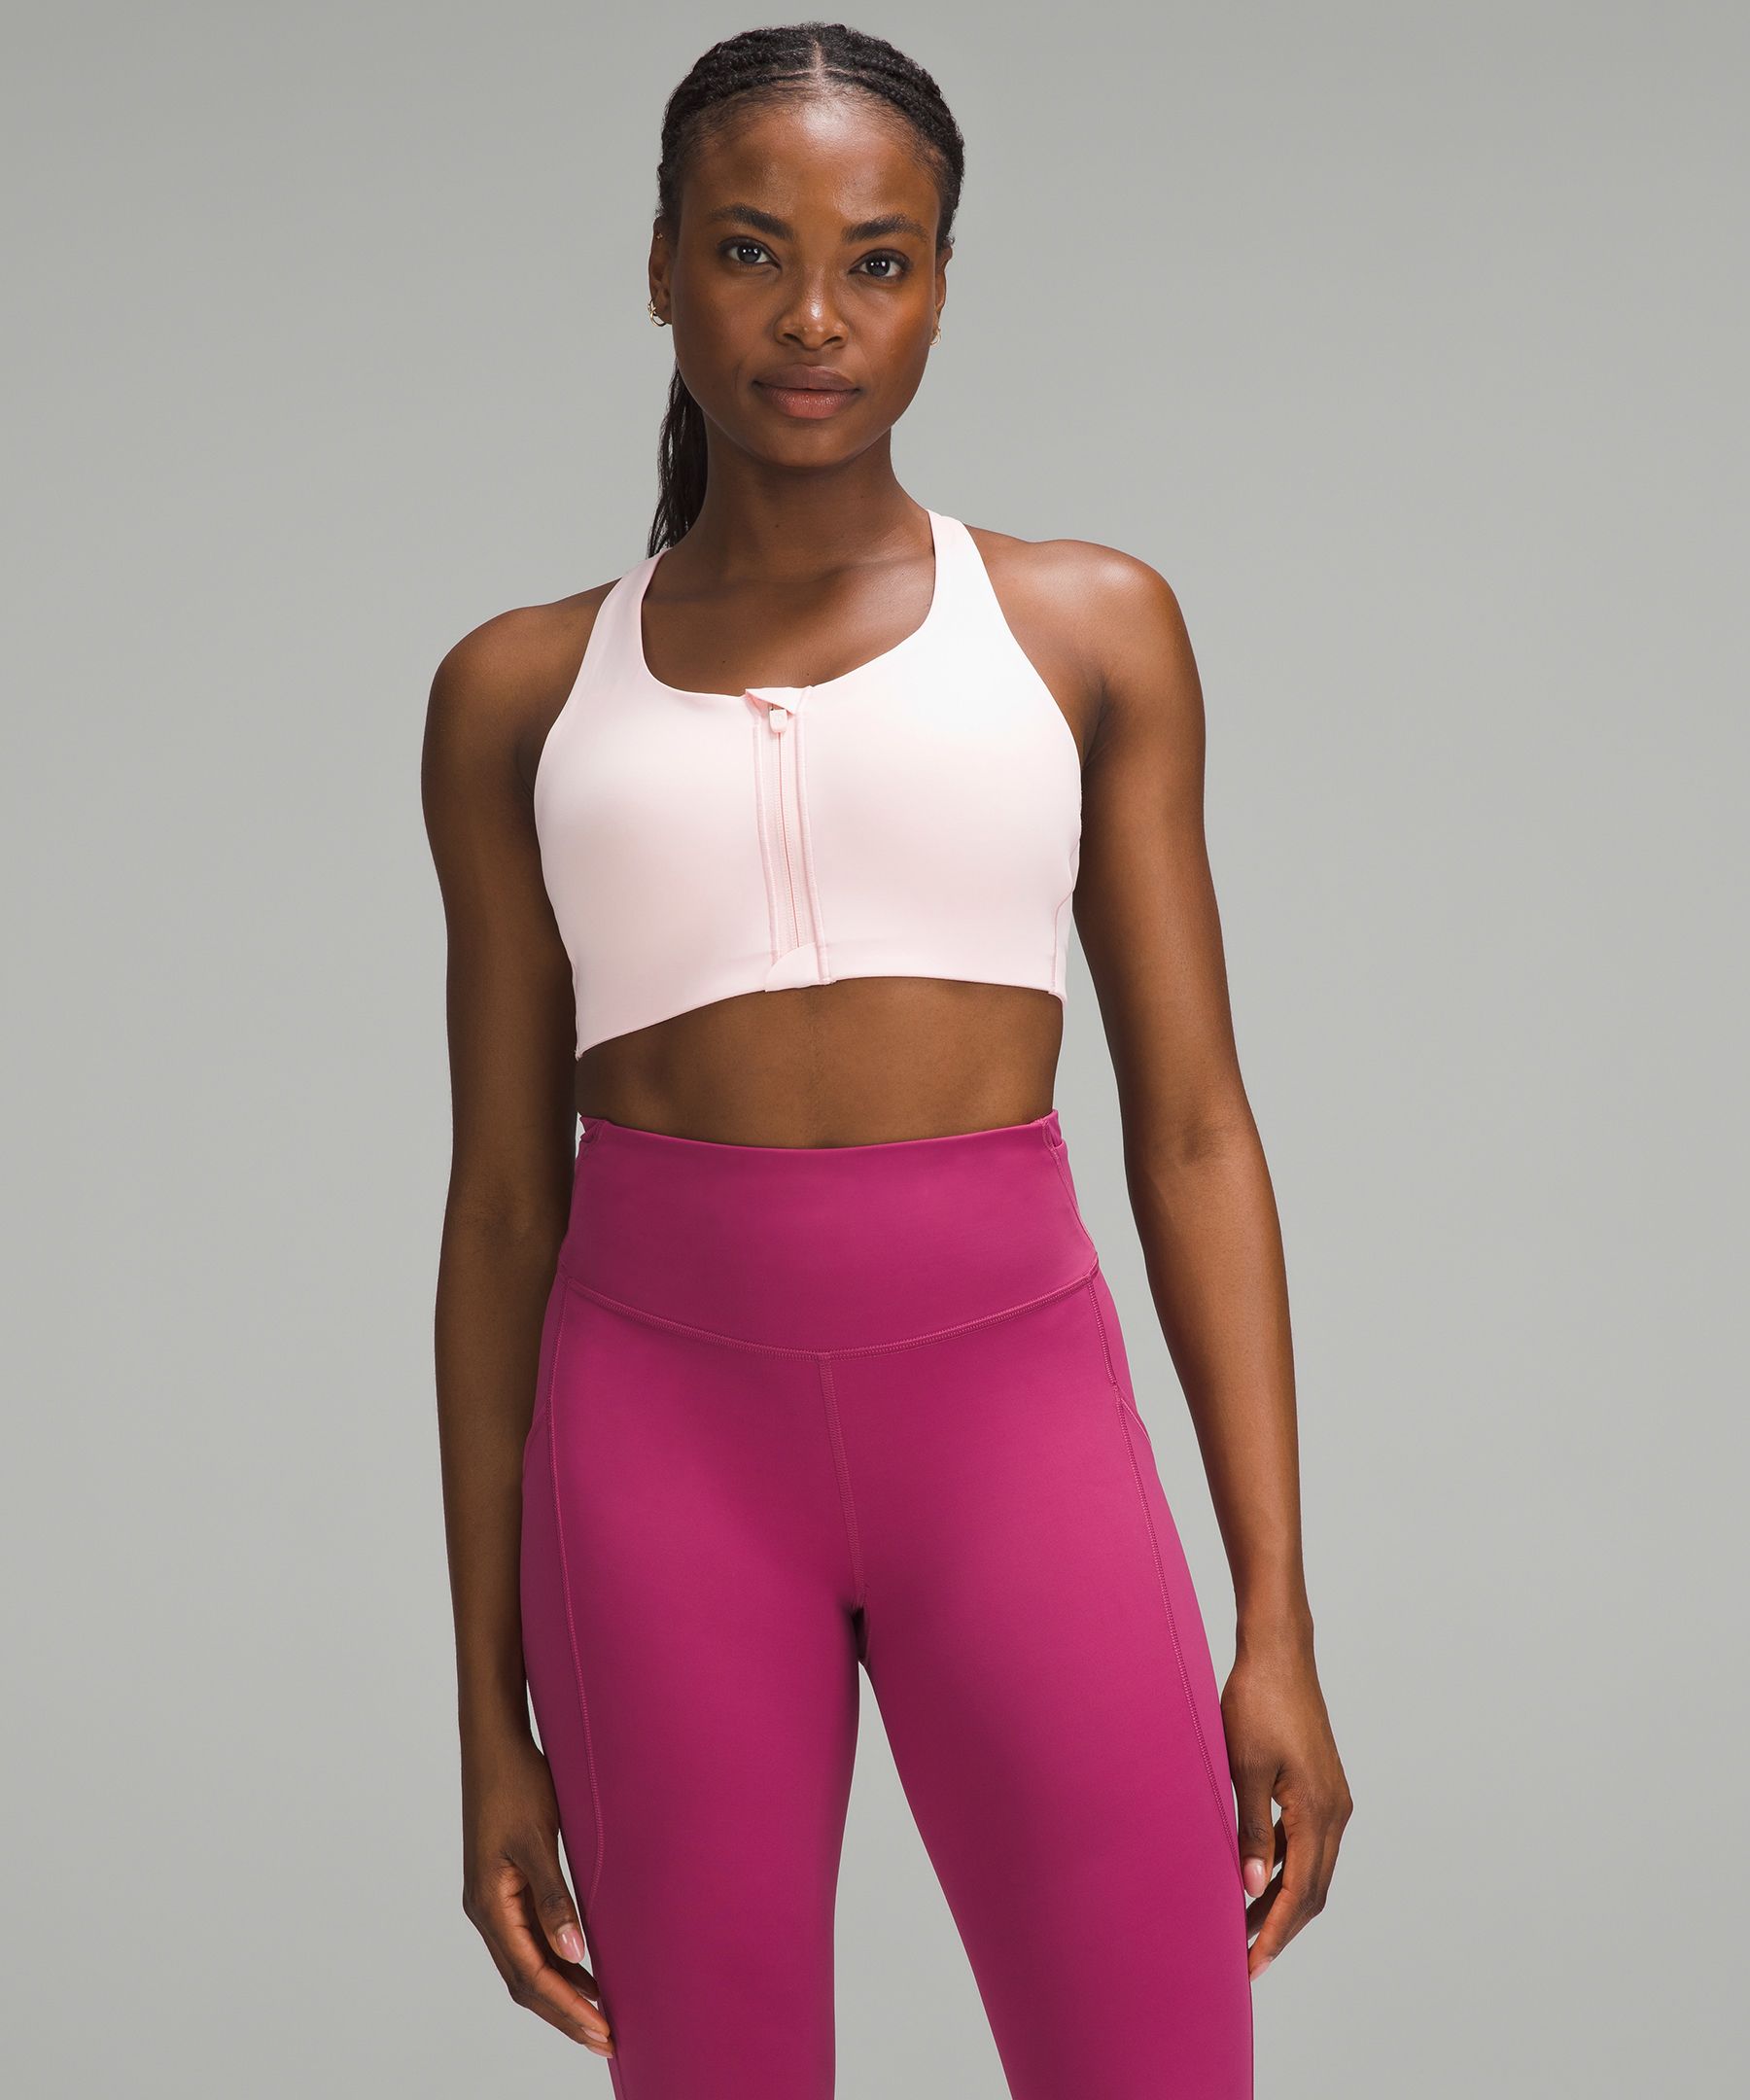 Pink Gilly Hicks ‘Let’s Bounce’ sports bra